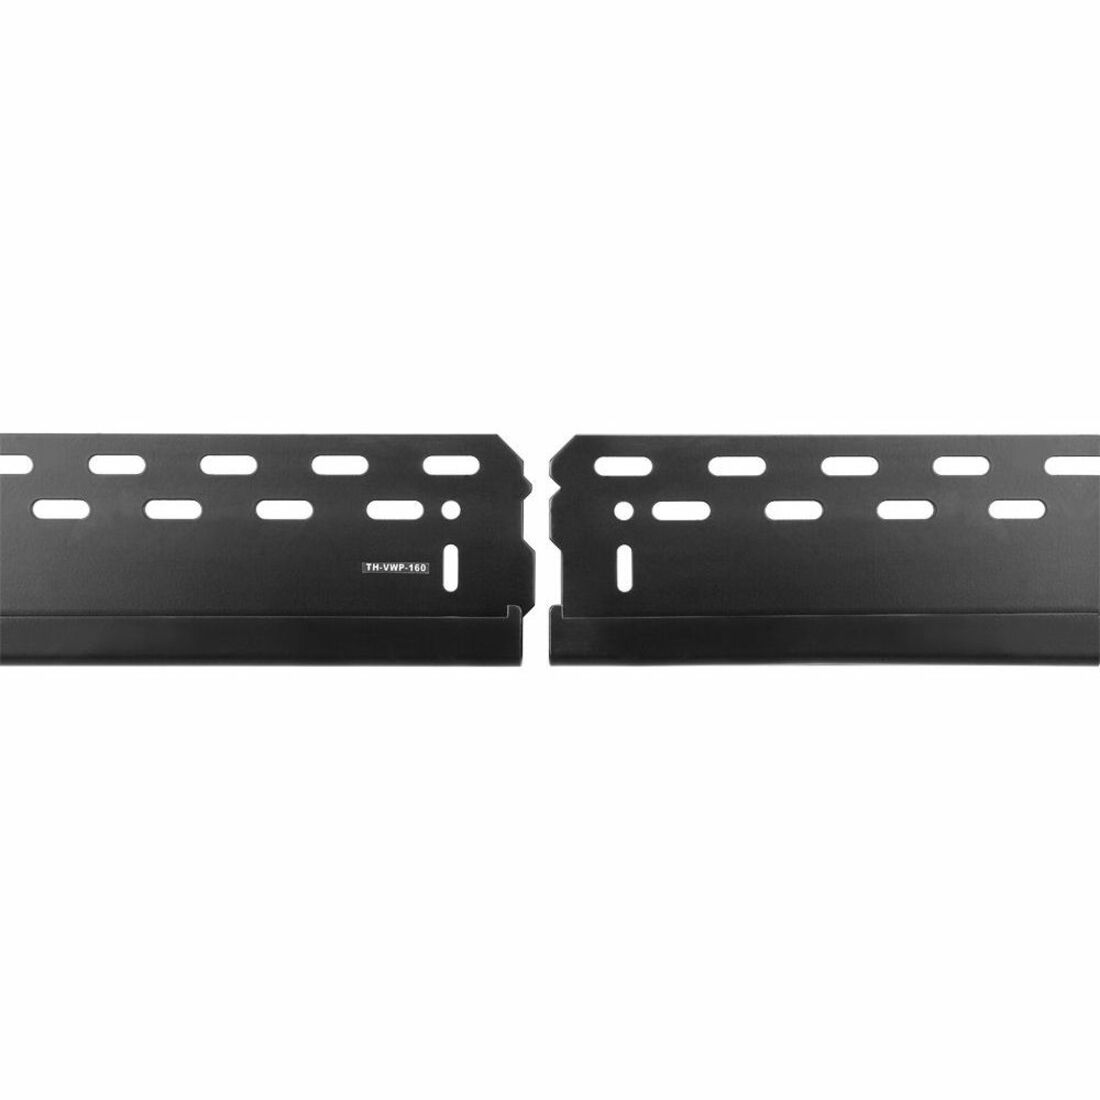 Atdec ADWS-3X2F-280-W 3 x 2 Video Wall Mount for 42" to 50" Displays, Wall Fixed